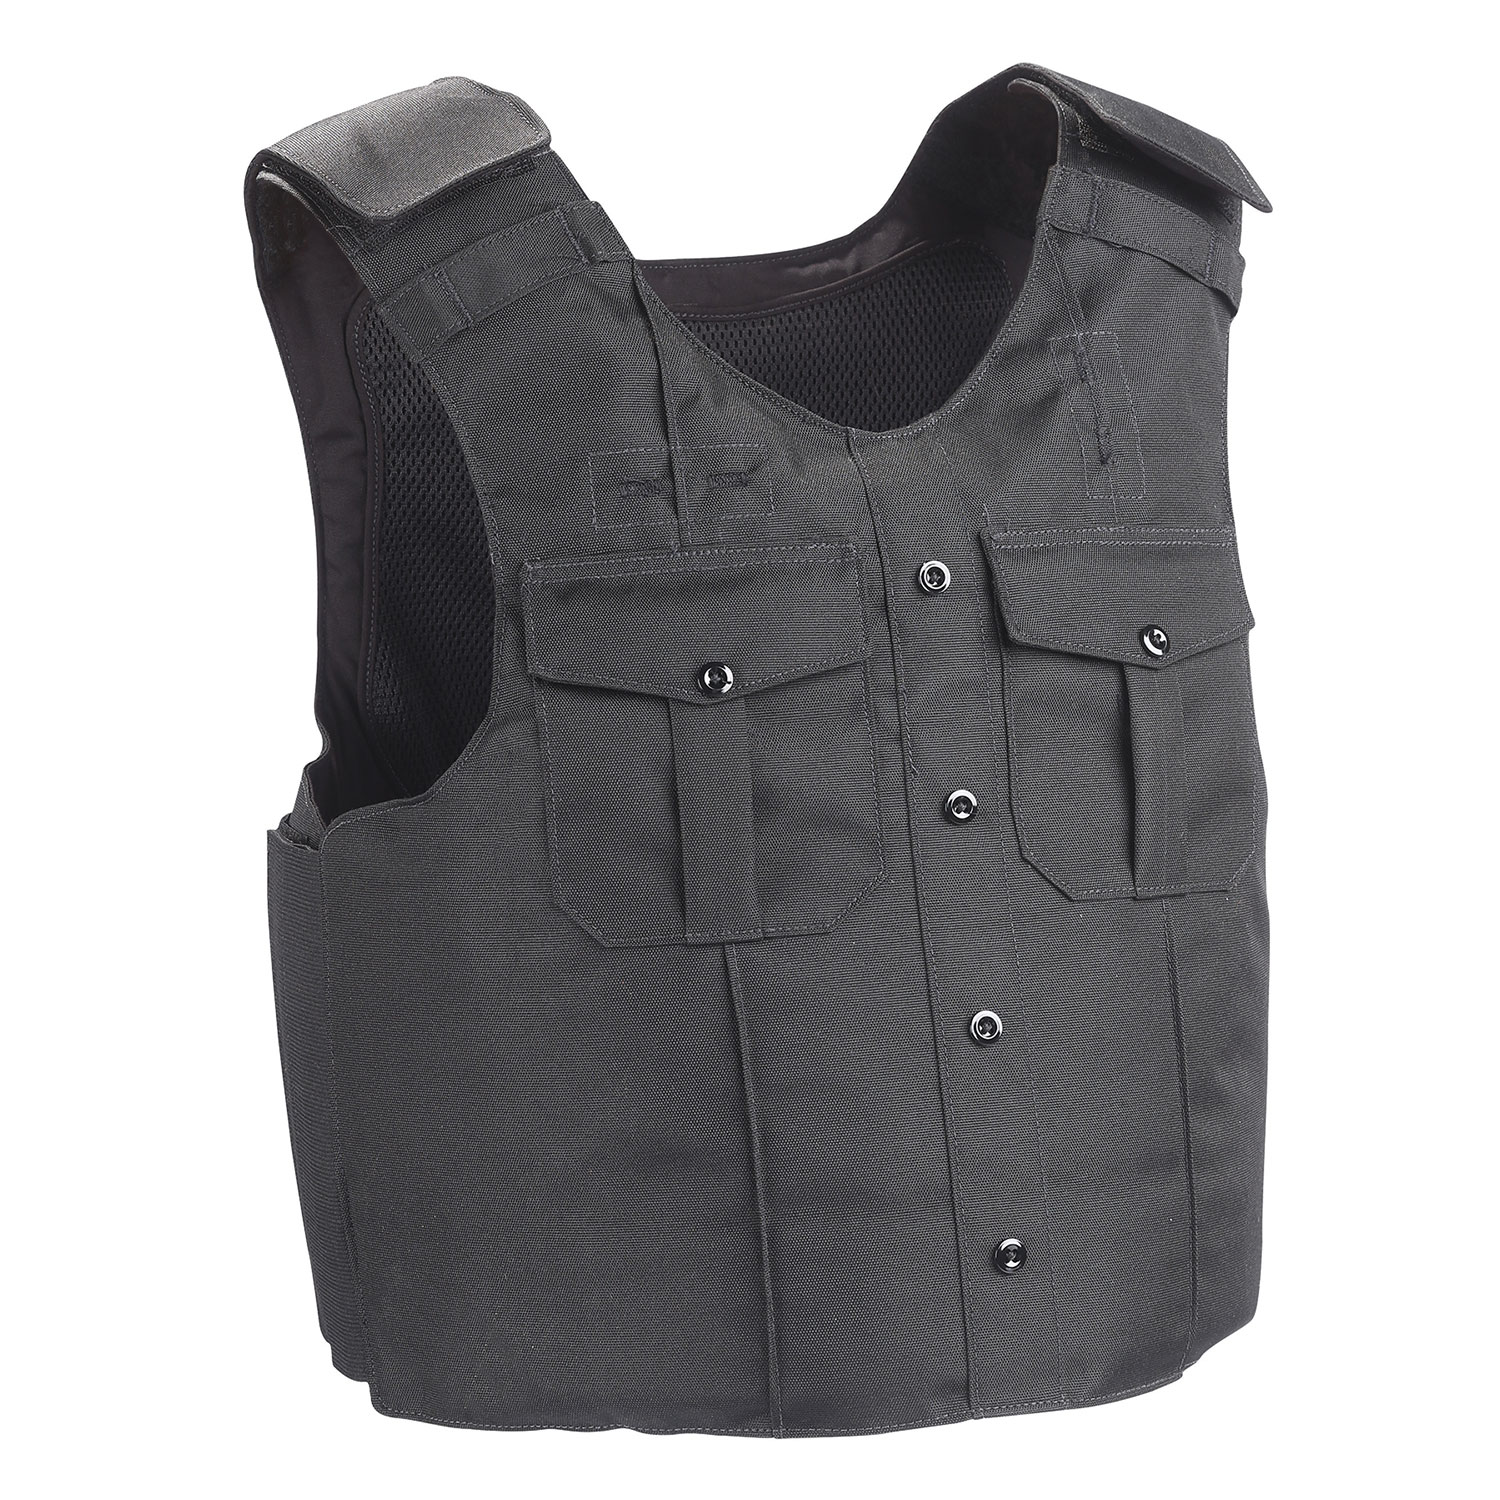 POINT BLANK PACA TAILORED ARMOR CARRIER